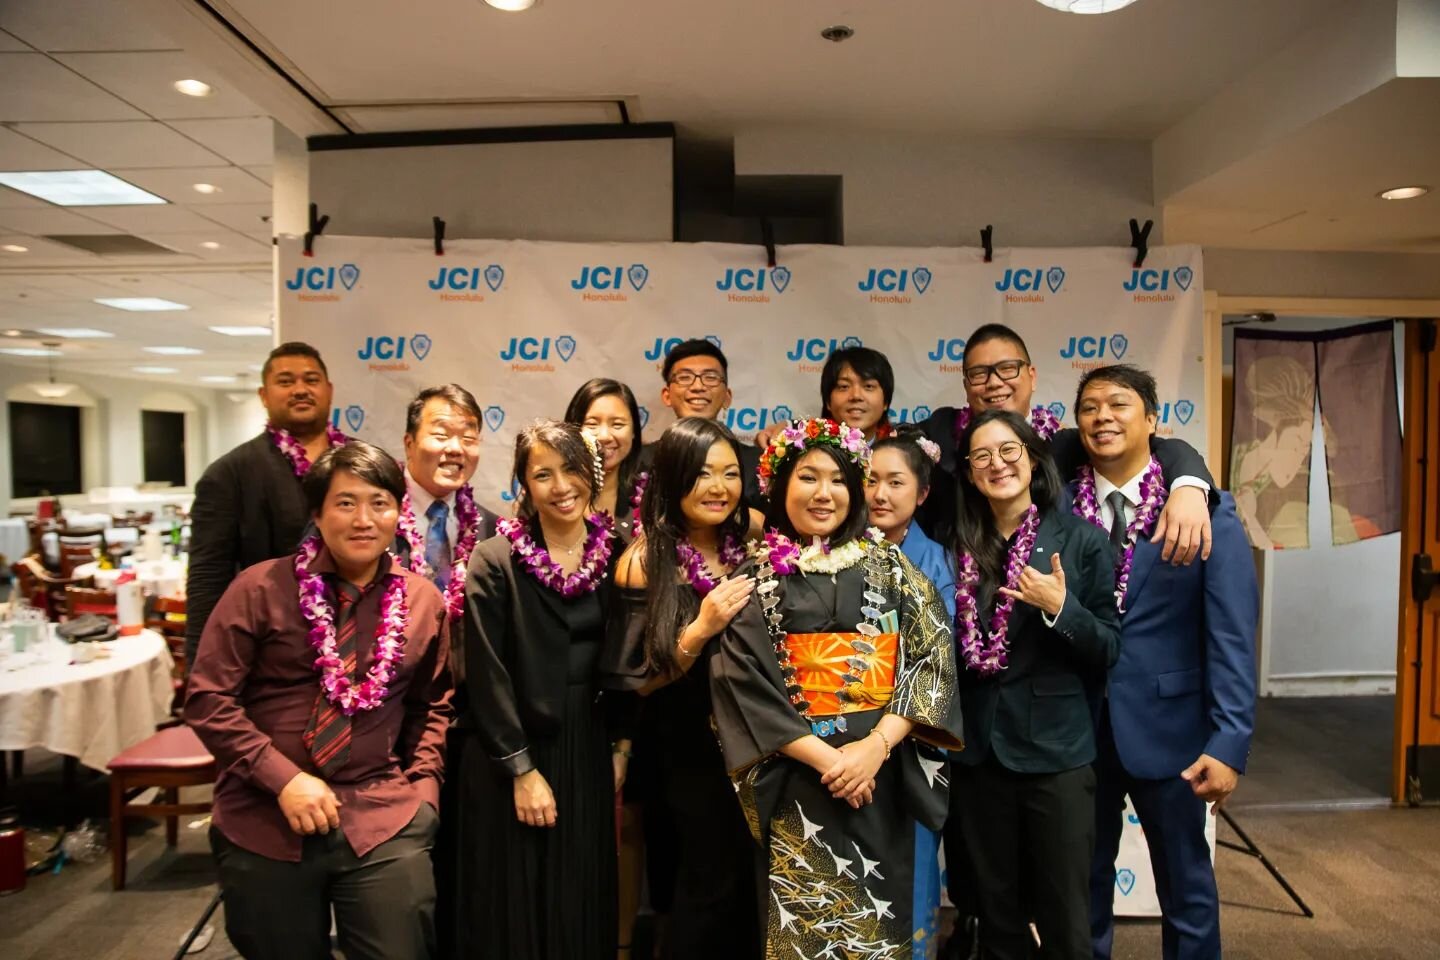 From the 2023 JCI Honolulu Board: We want to thank everyone who was able to attend our A&amp;I. We cannot thank you enough for your support.
Here's to the 2023 year. Let's make it a wonderful one and embrace the journey. 
Cheers and Meow!!! 🎉🎉